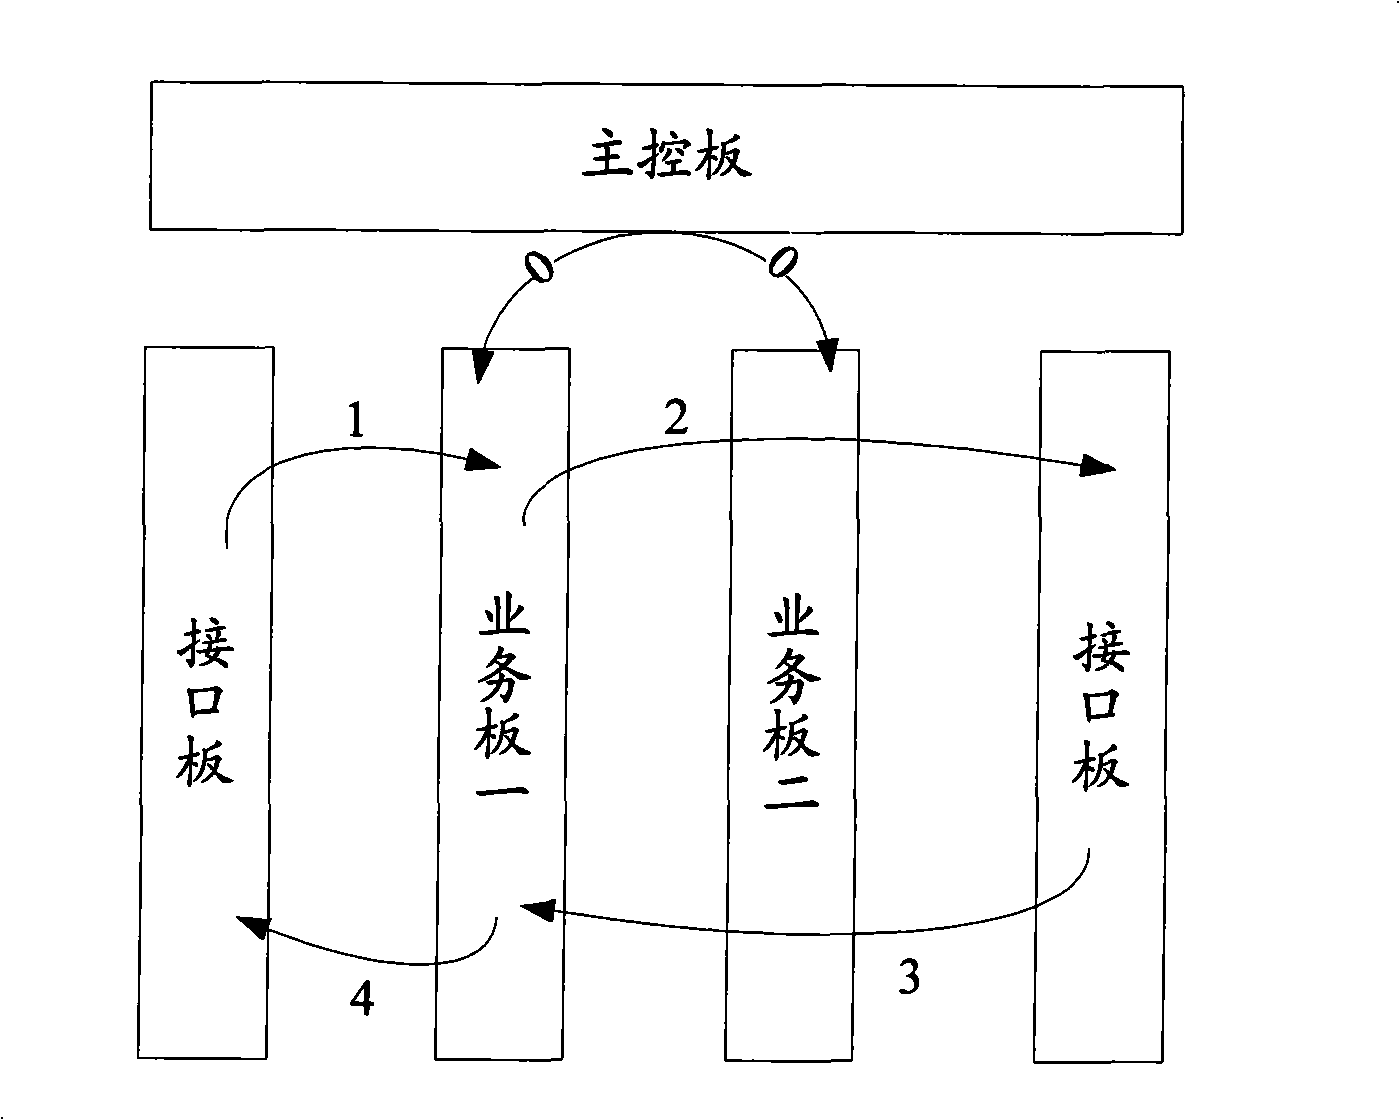 Method, apparatus and system for forwarding packet